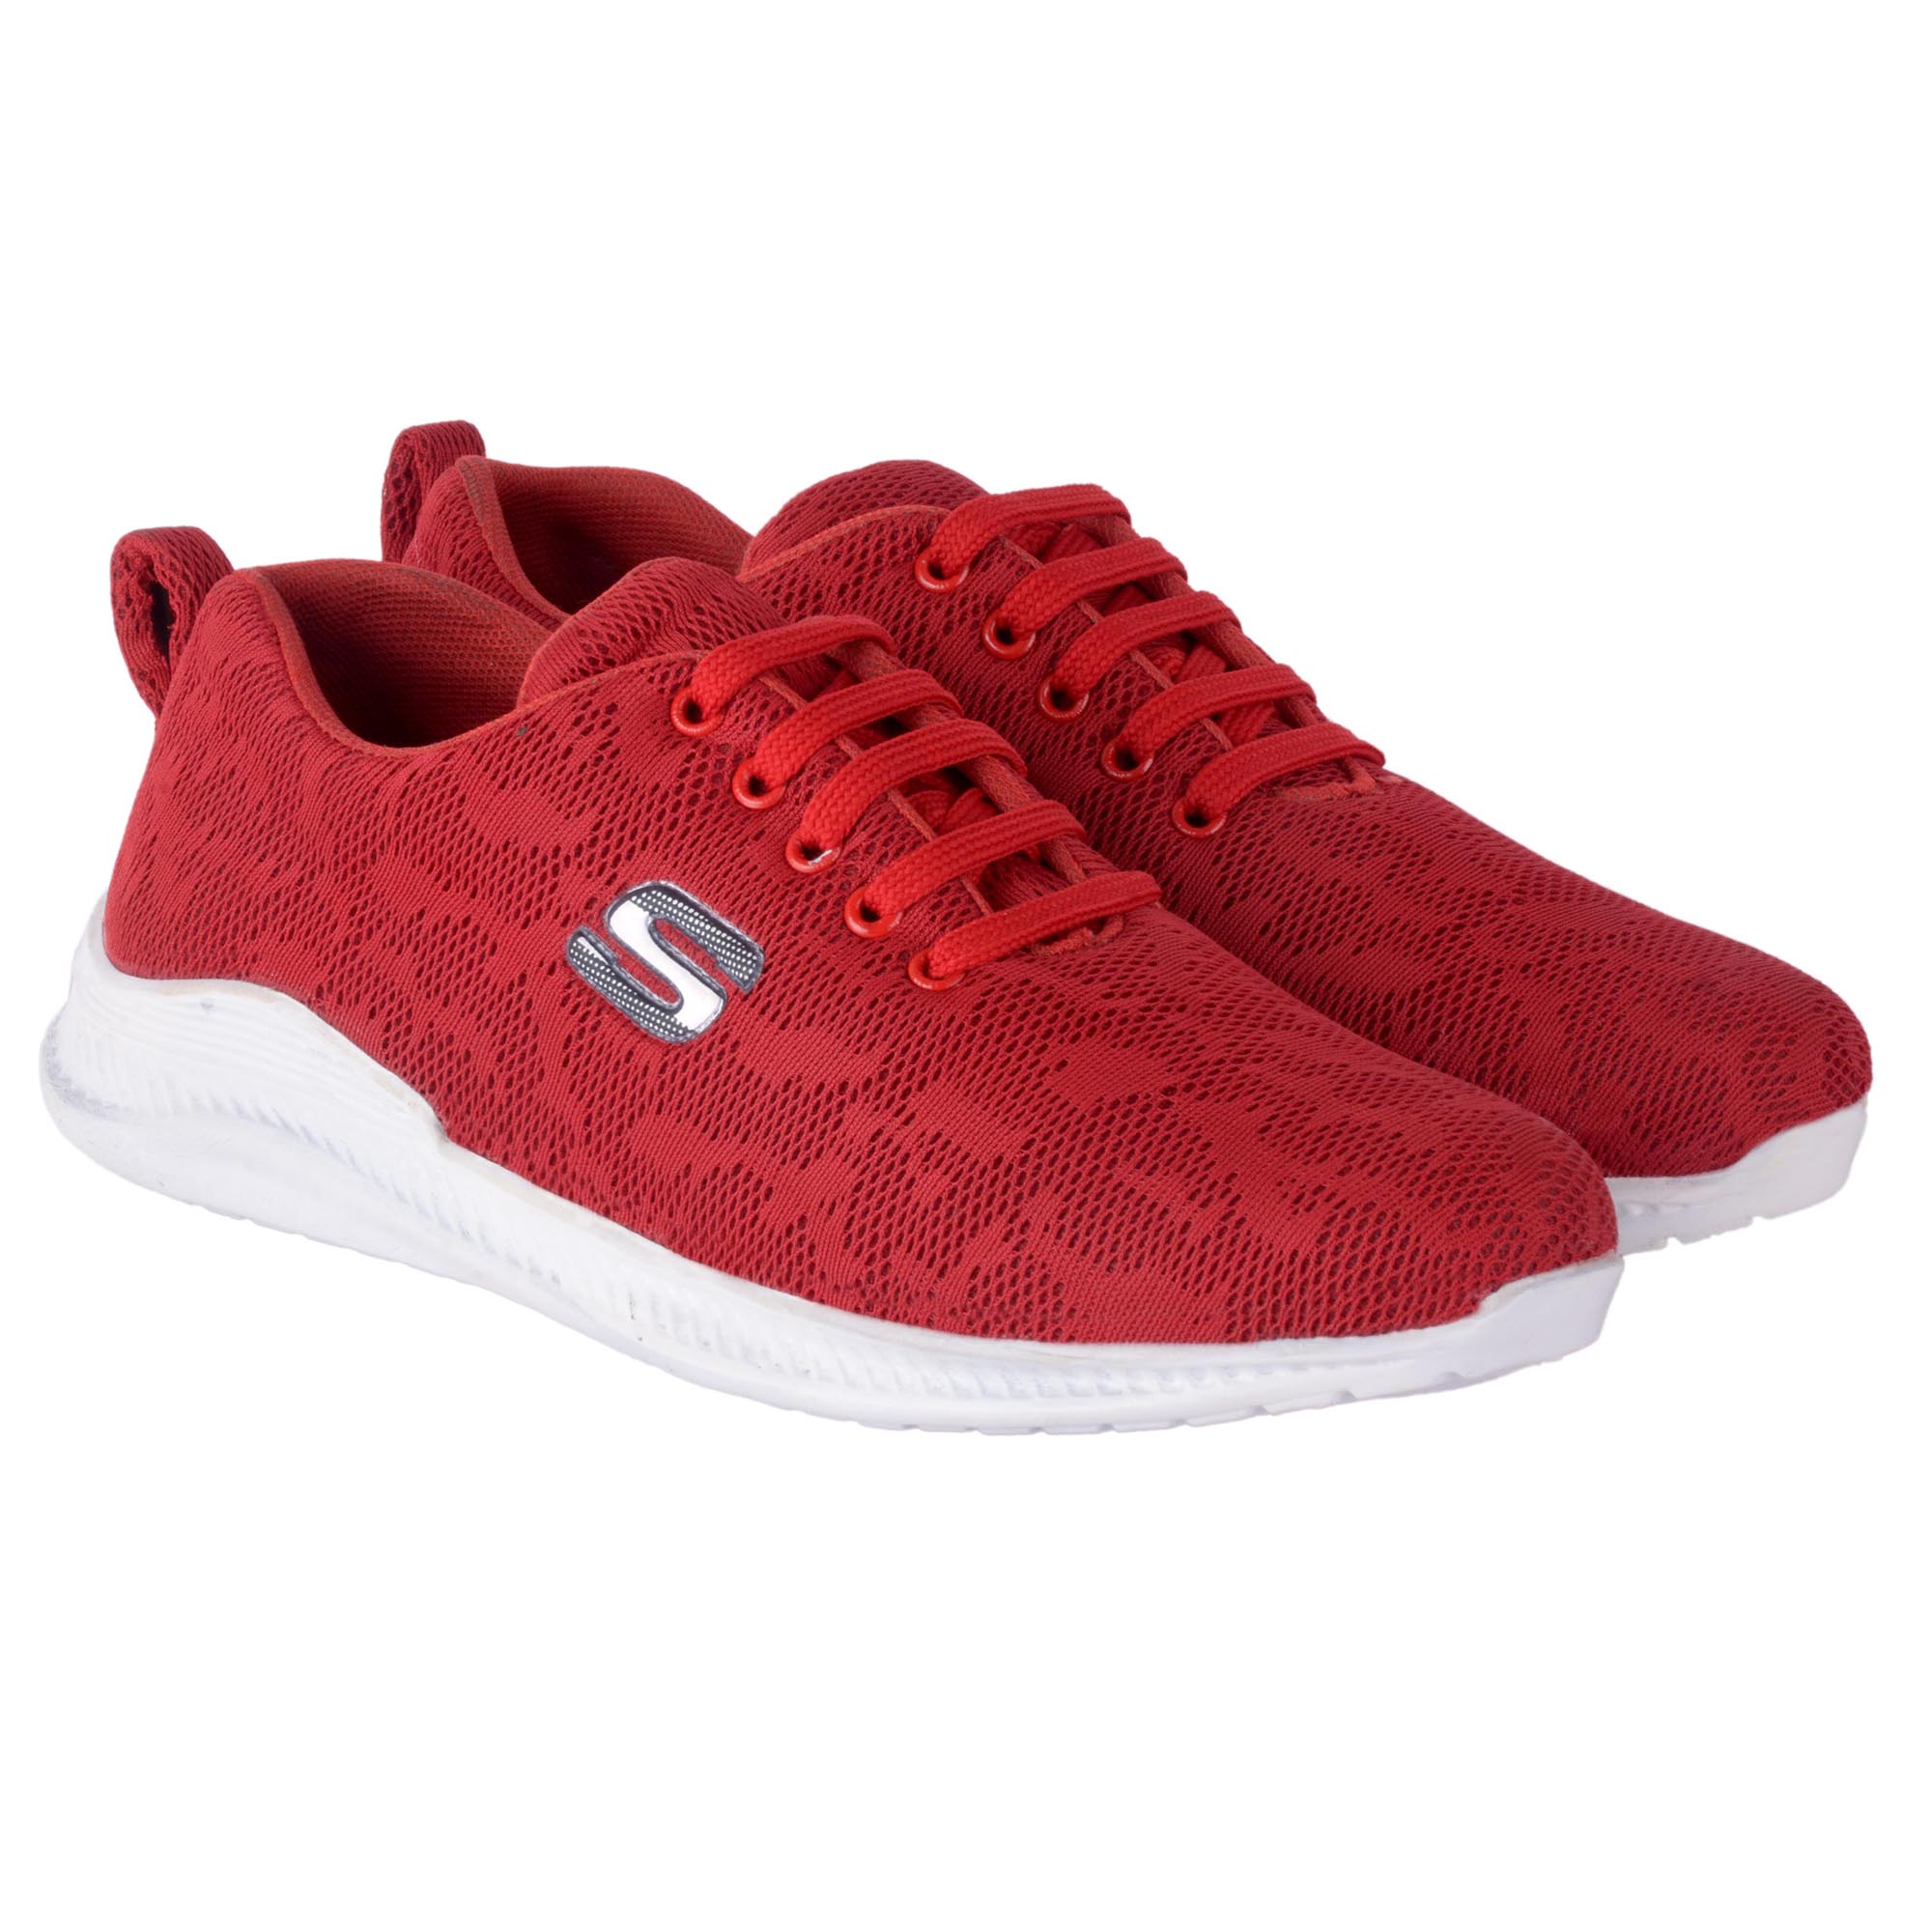 Buy Red Stylish Sports Shoes for Men Online - Get 74% Off